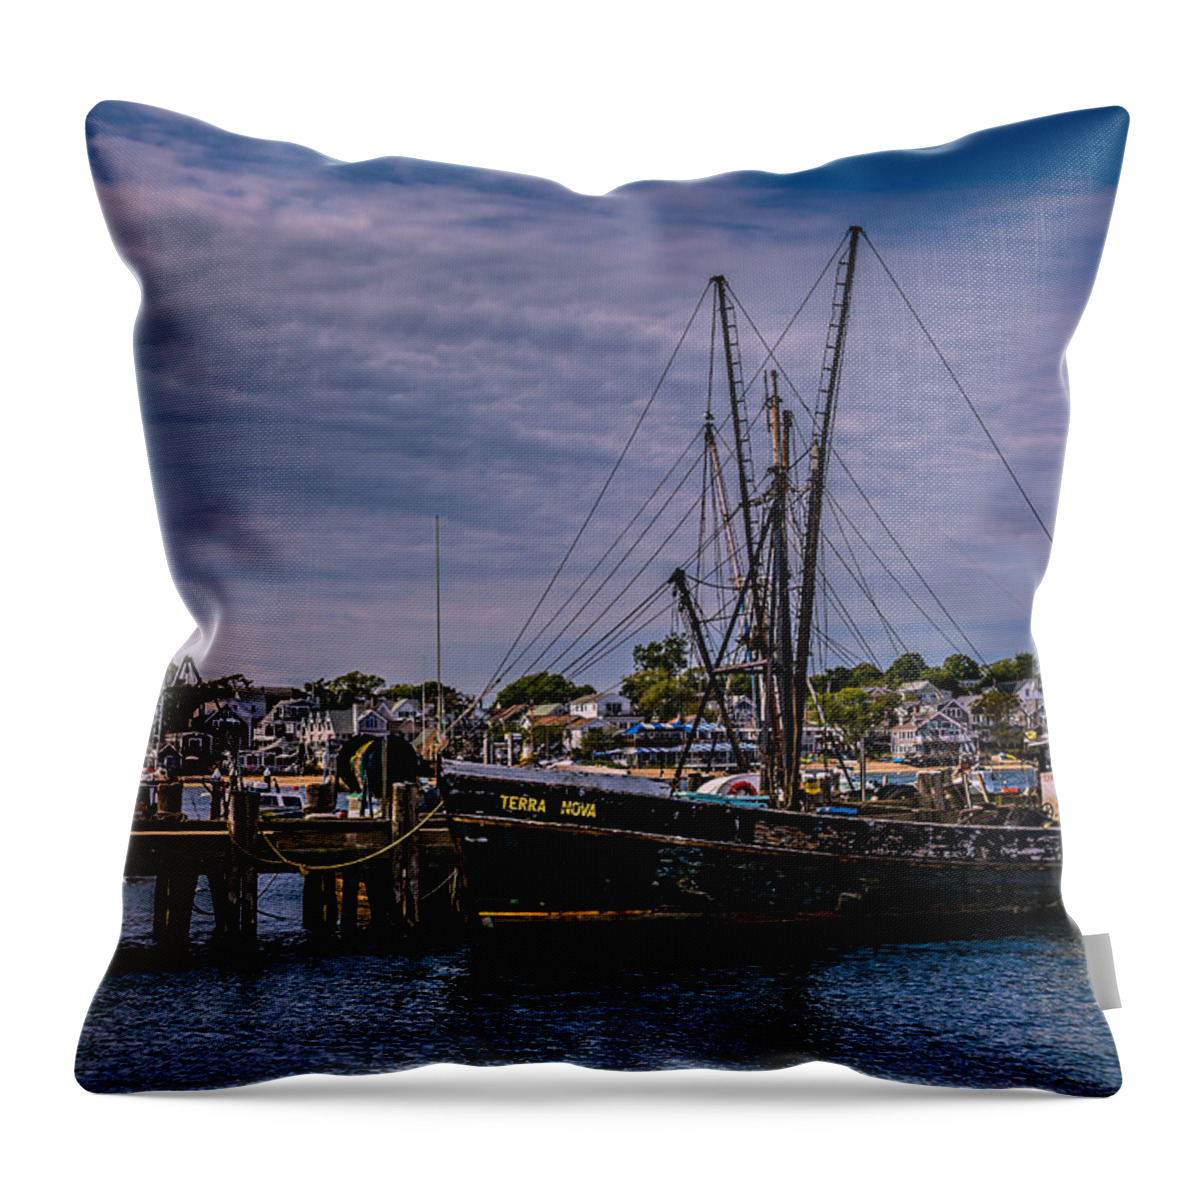 Cape Cod Throw Pillow featuring the photograph Terra Nova Fishing Trolley by Susan Candelario